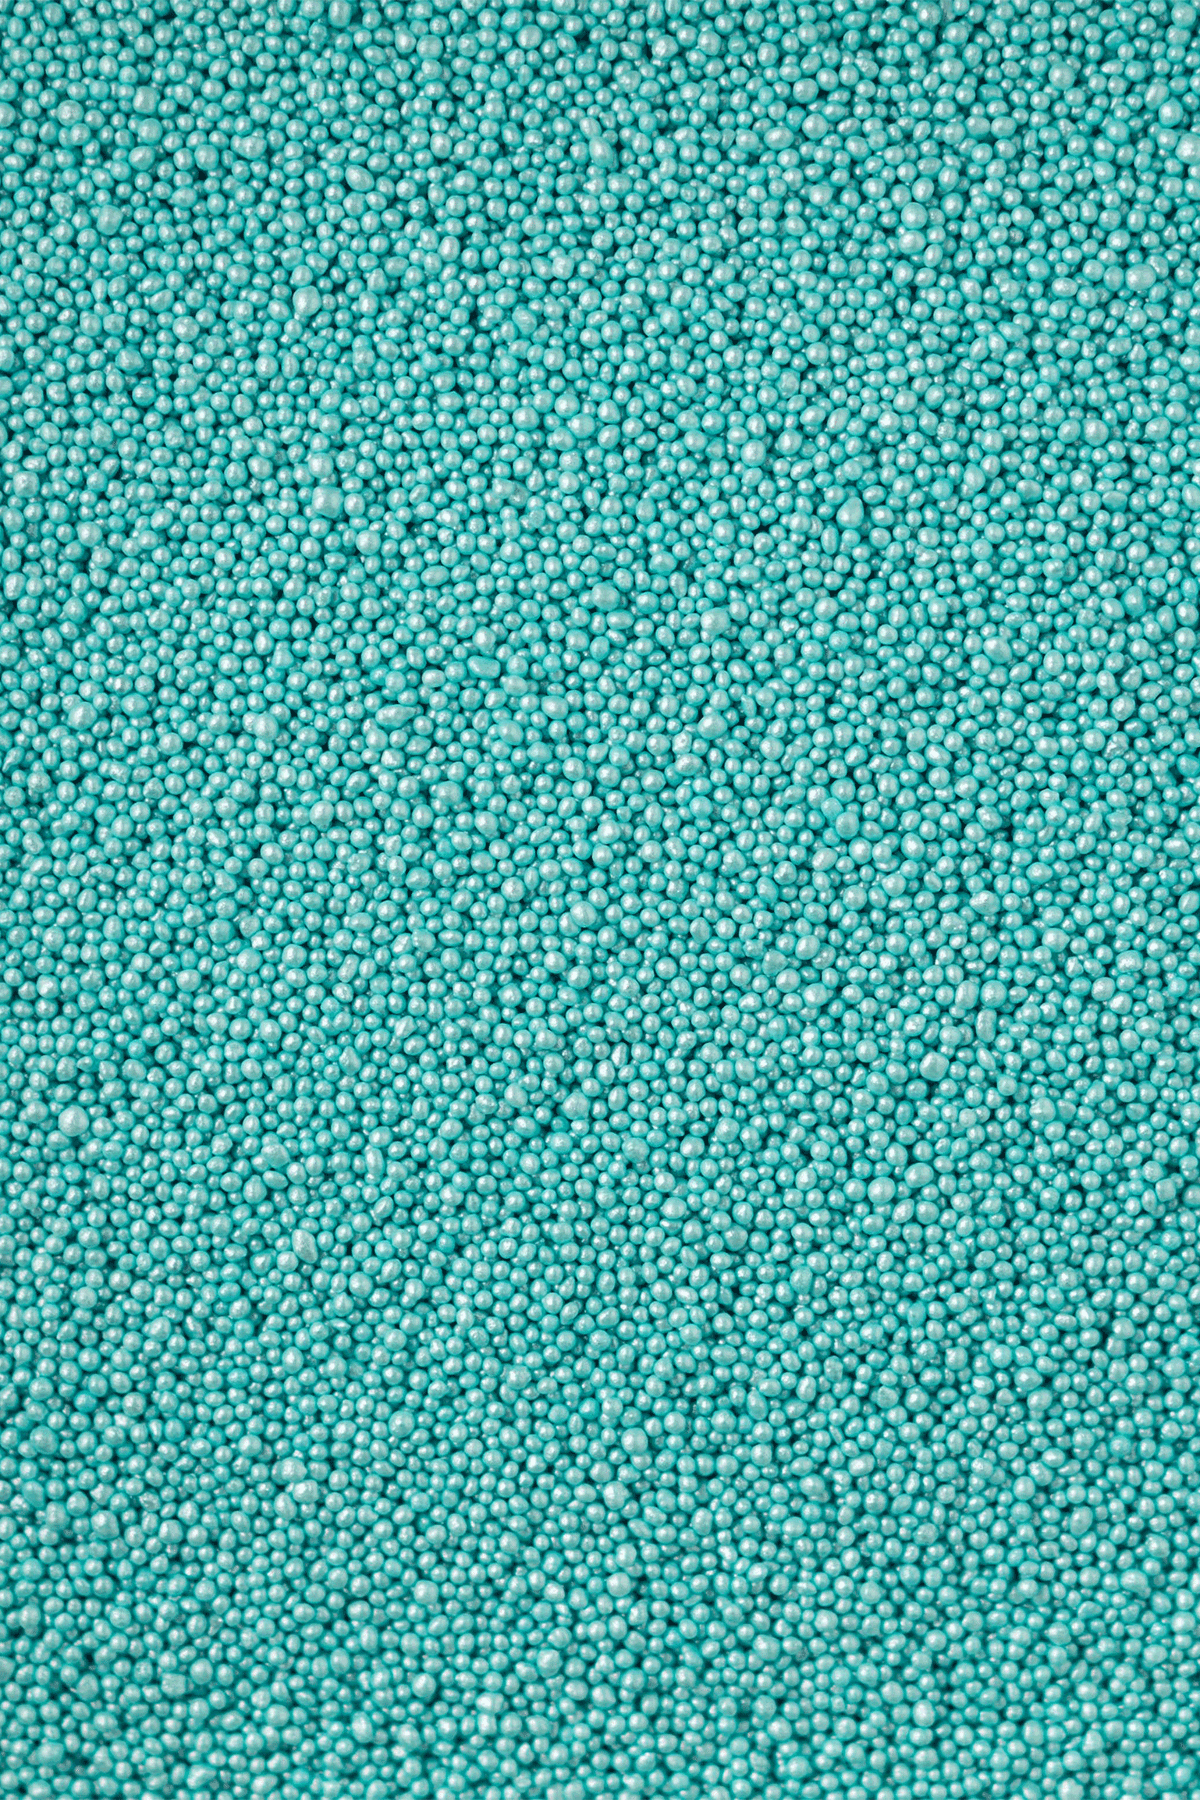 Glimmer 100's & 1000's - Turquoise Sprinkles Sprinkly